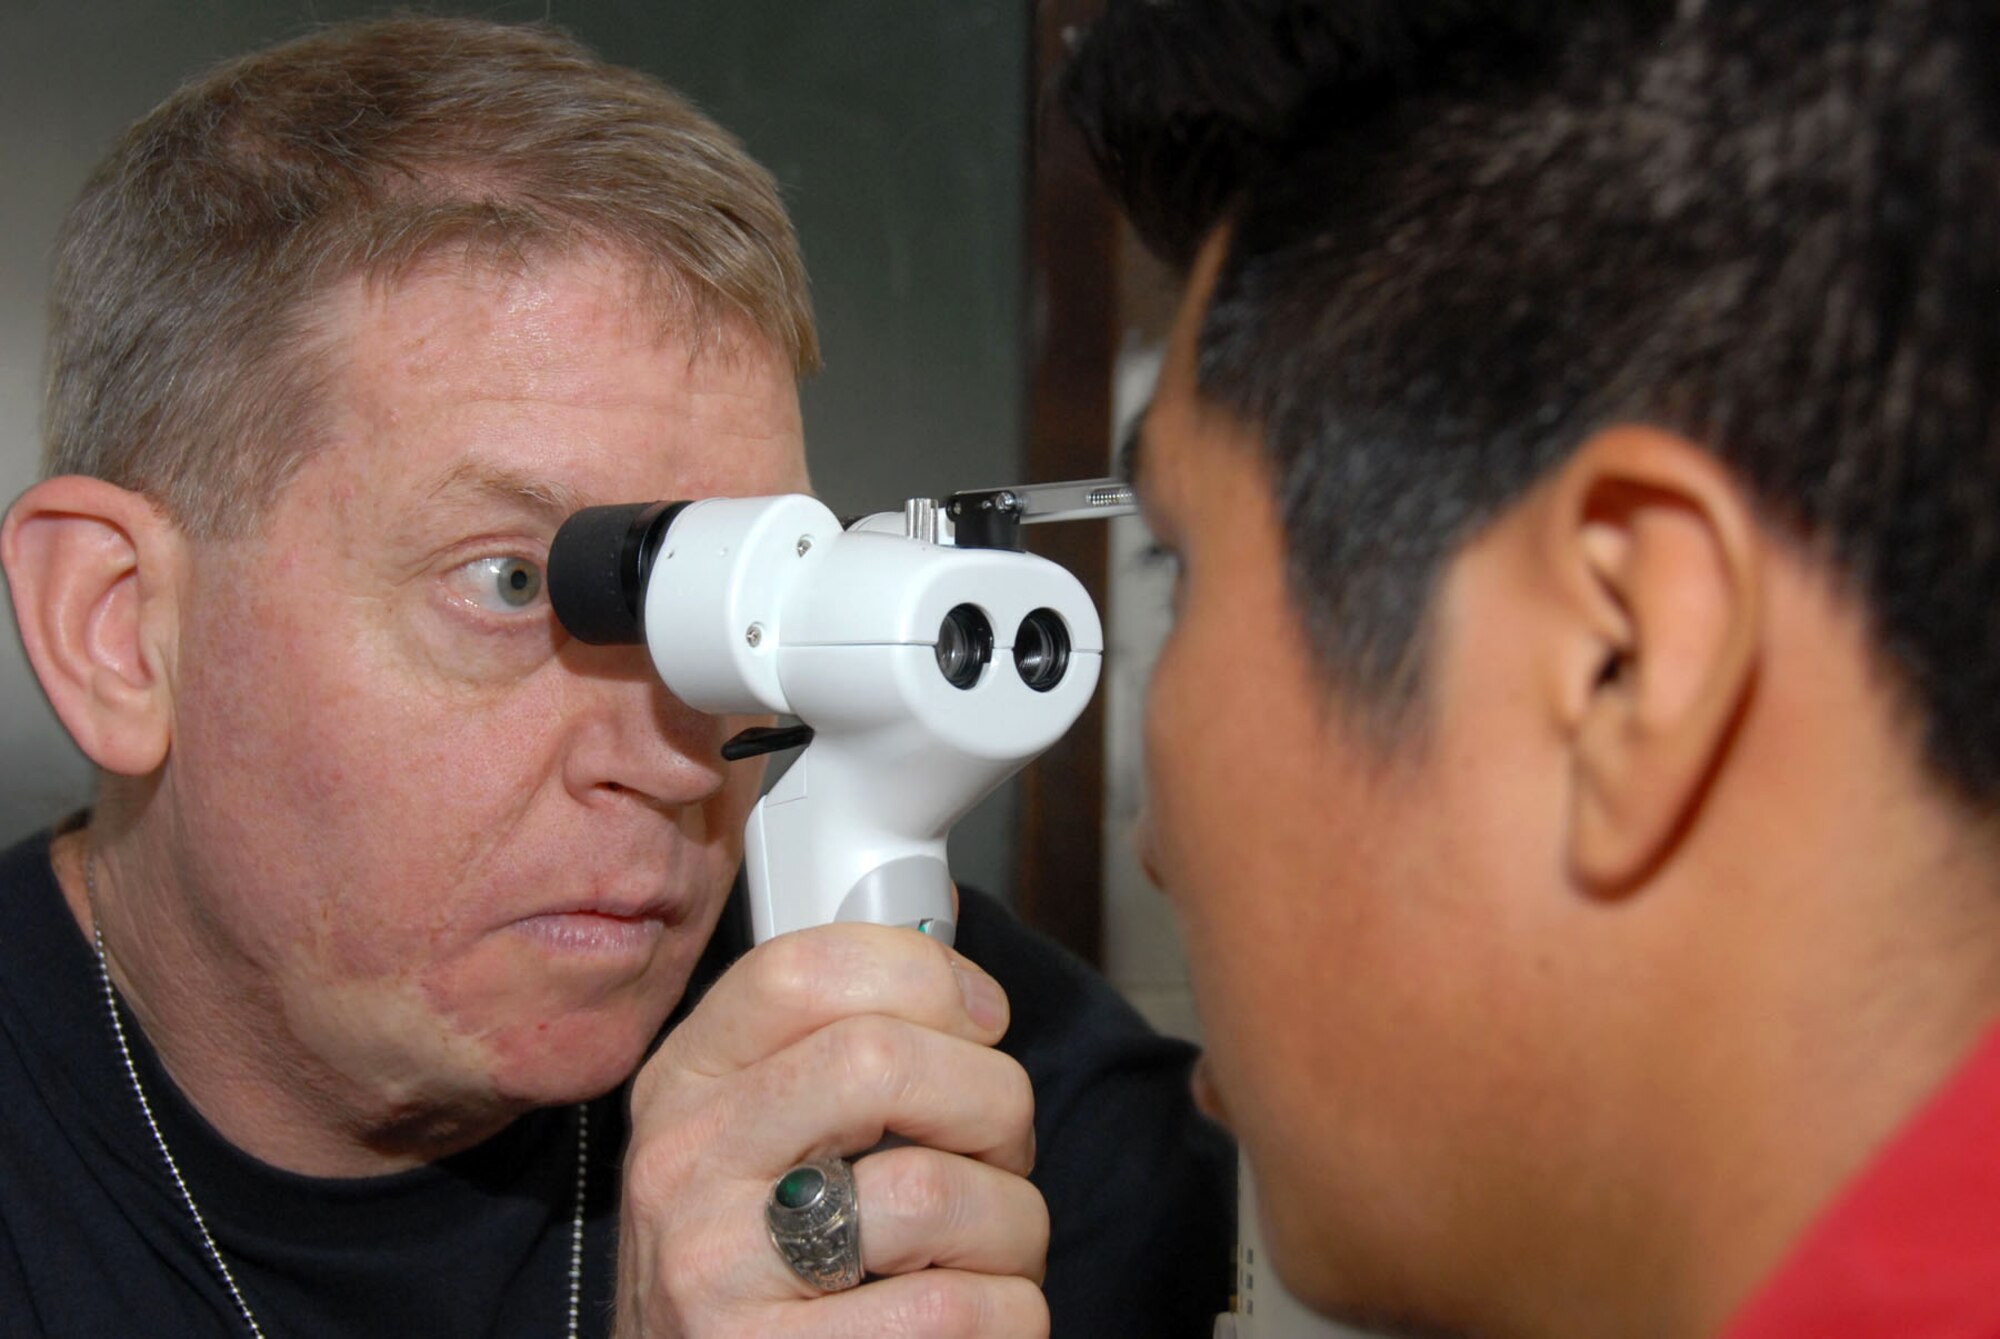 Lt. Col. (Dr.) Clifton Poling examines the front of the eye of a Guatemalan with a hand held slit lamp during the New Horizons Medical Readiness Training Exercise conducted April 14 through 28 in the region of San Marcos, Guatemala. More than 750 pairs of presription eyeglasses were given during the exercise. Colonel Poling is an optometrist with the 445th Aerospace Medicine Squadron, Wright Patterson Air Force Base, Ohio. (U. S. Air Force photo/Master Sgt. Chance C. Babin)
